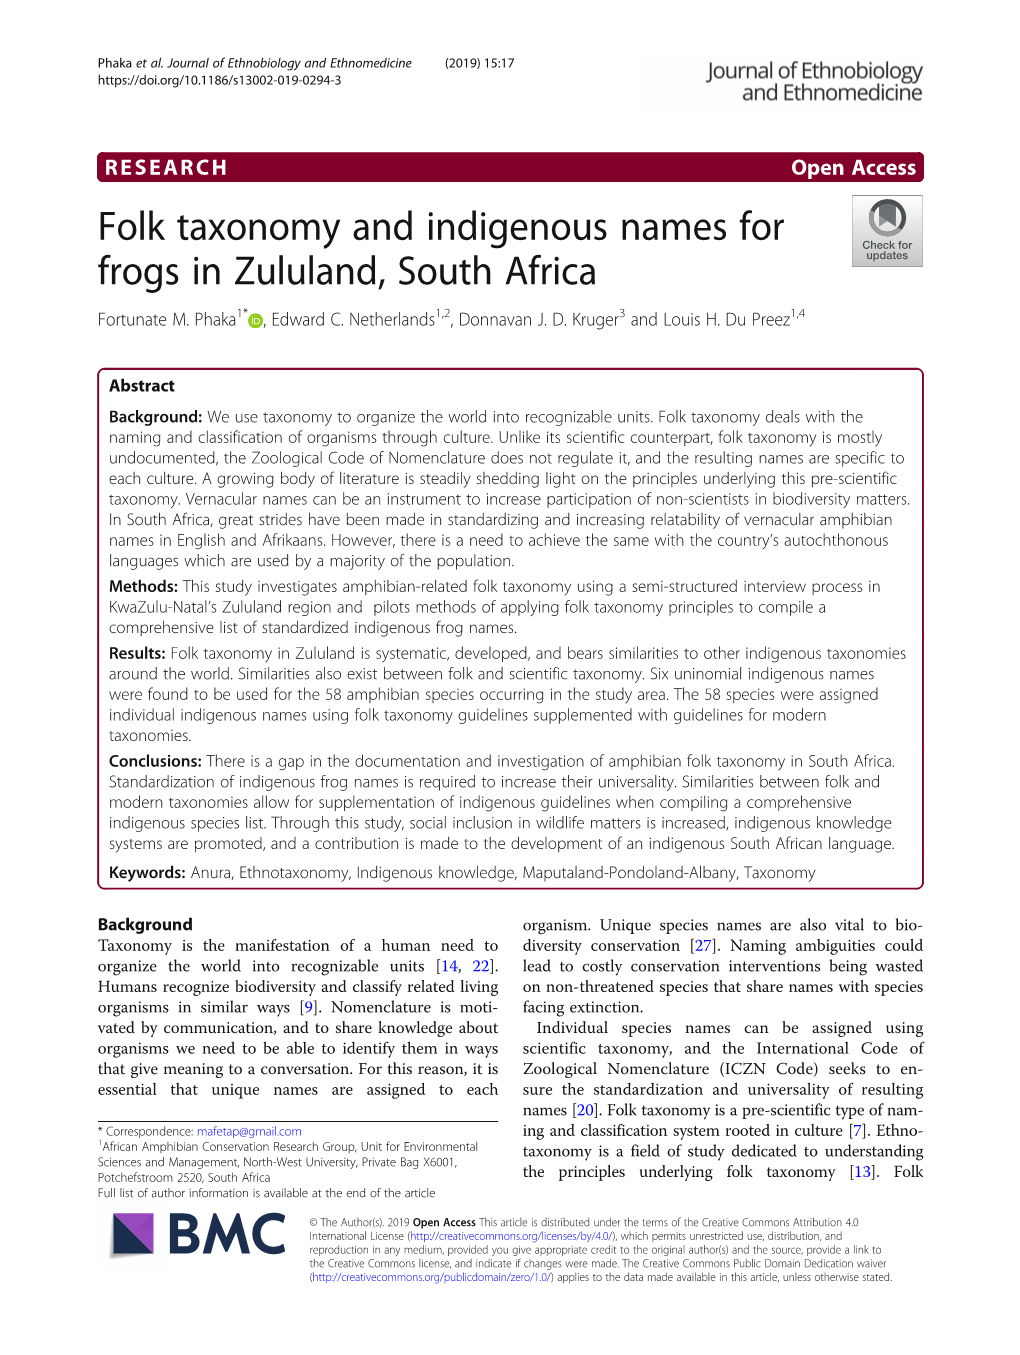 Folk Taxonomy and Indigenous Names for Frogs in Zululand, South Africa Fortunate M